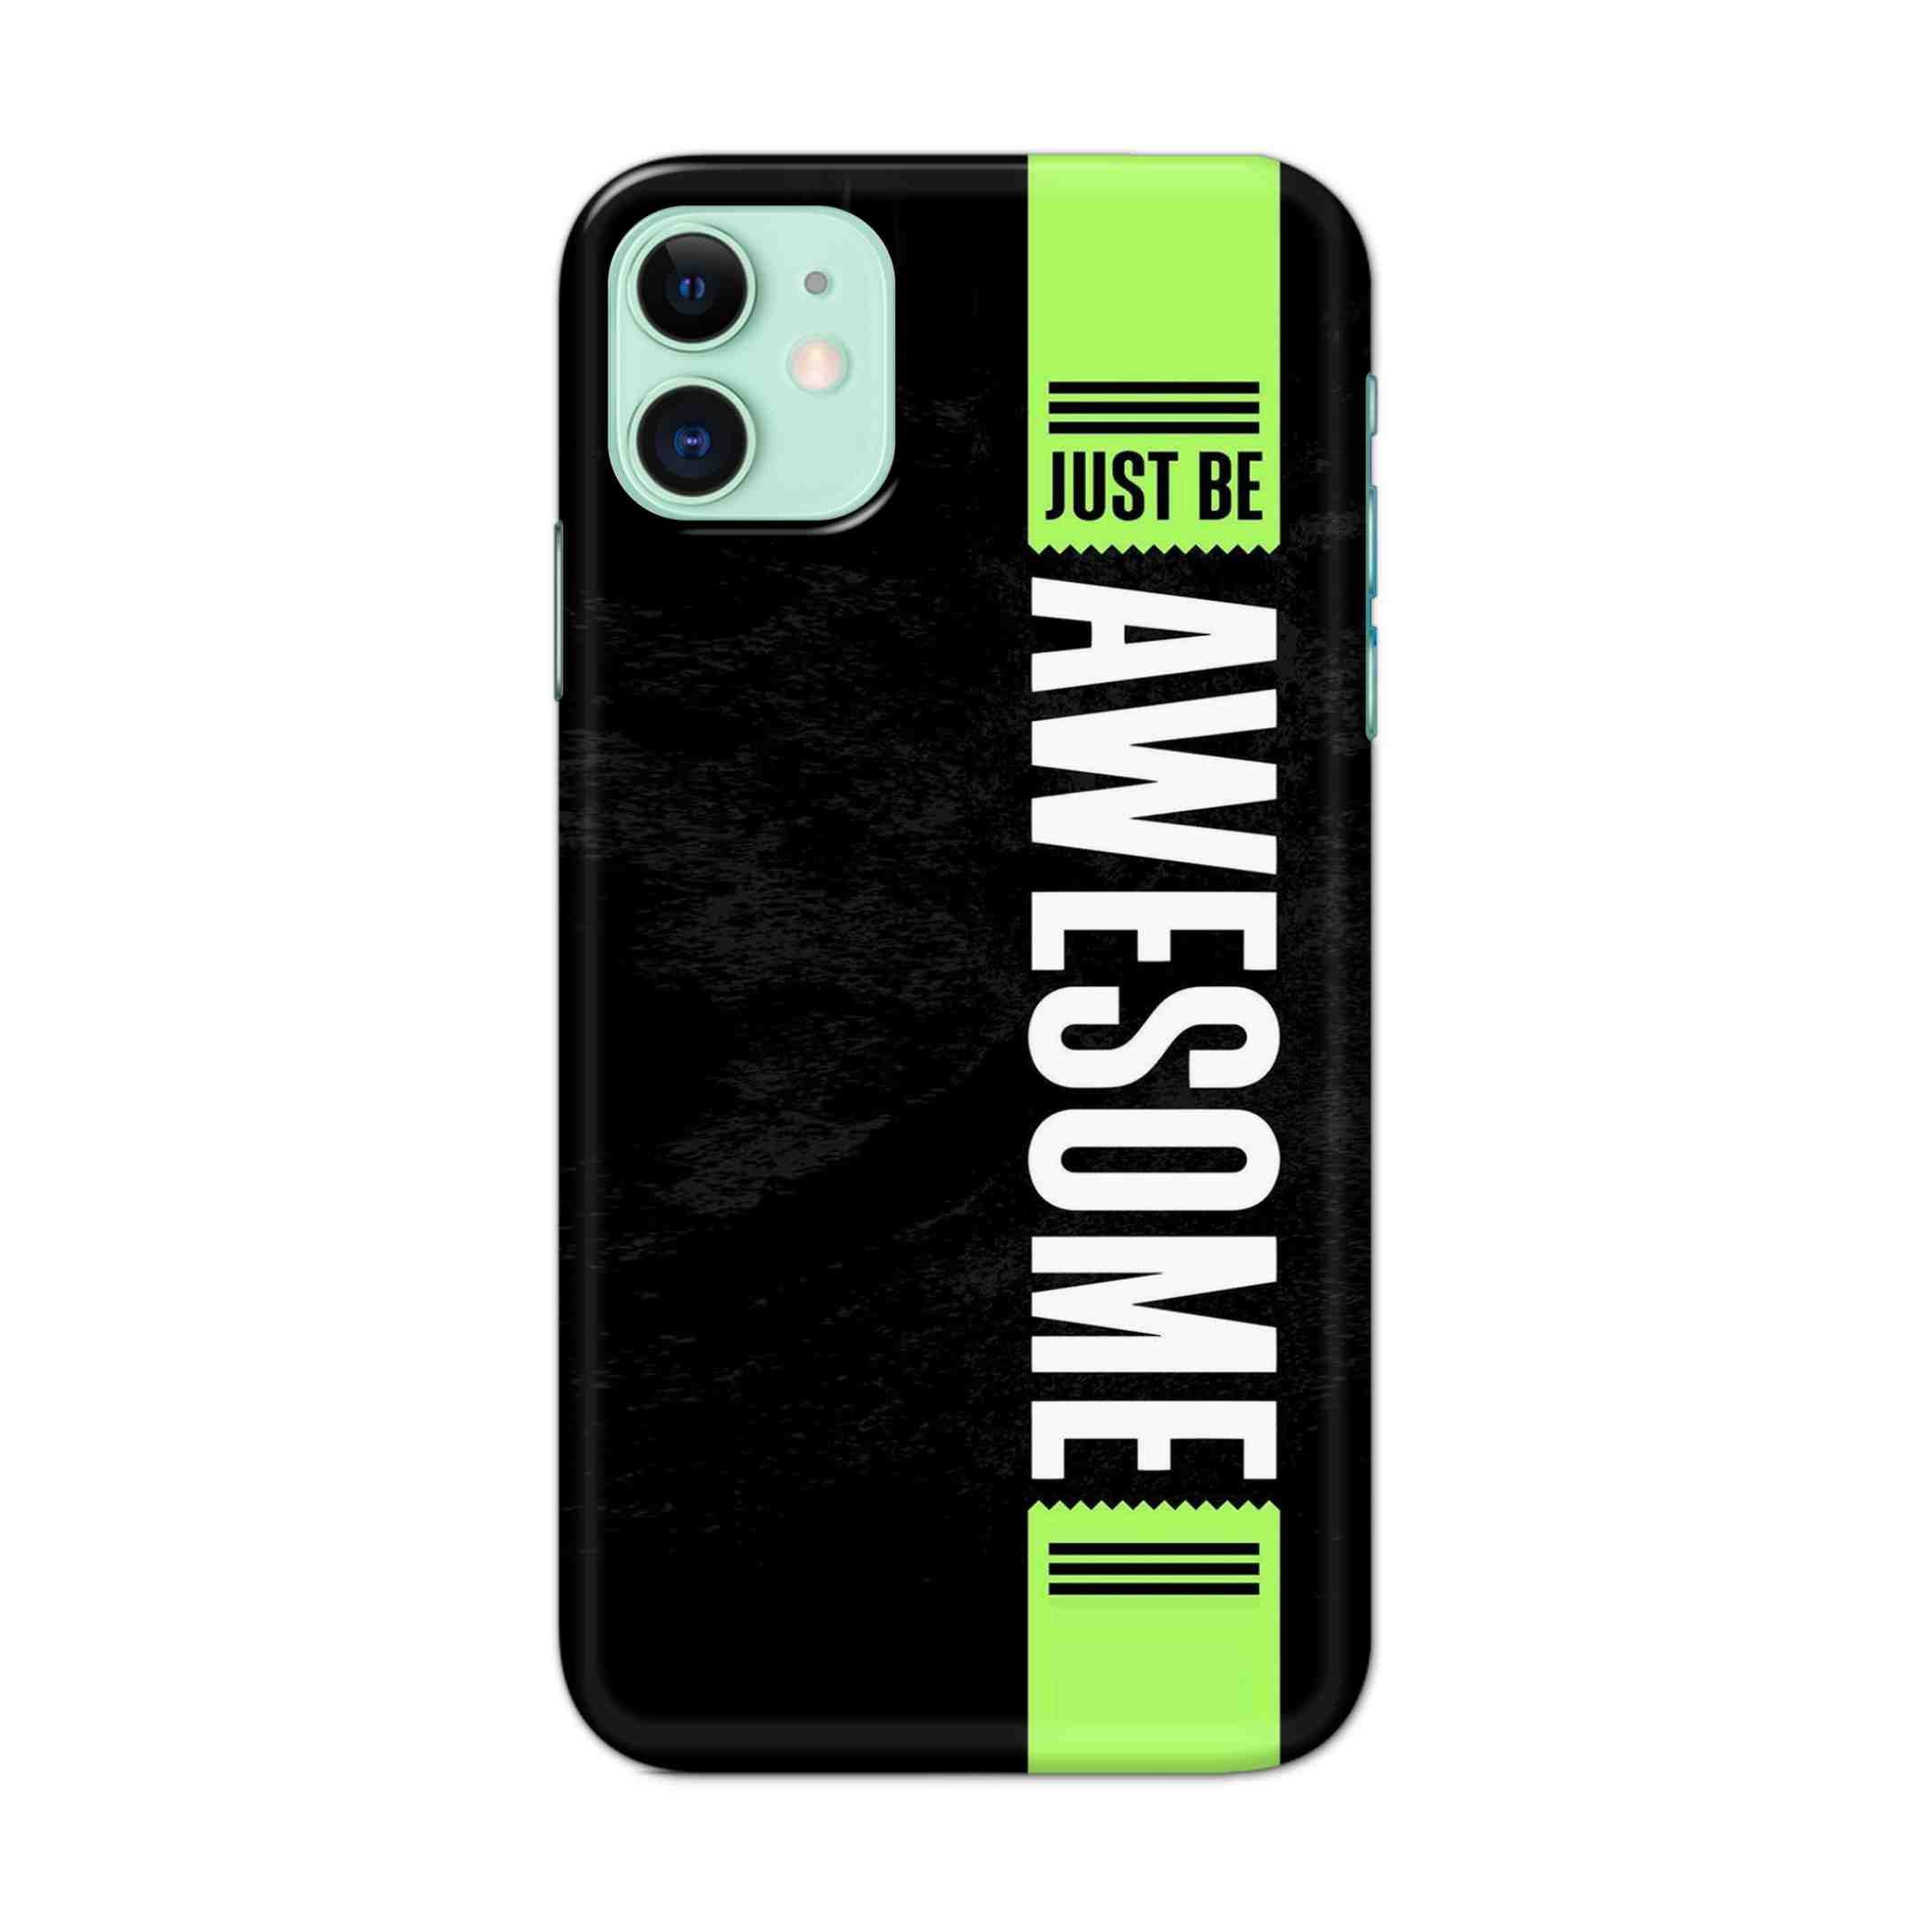 Buy Awesome Street Hard Back Mobile Phone Case/Cover For iPhone 11 Online